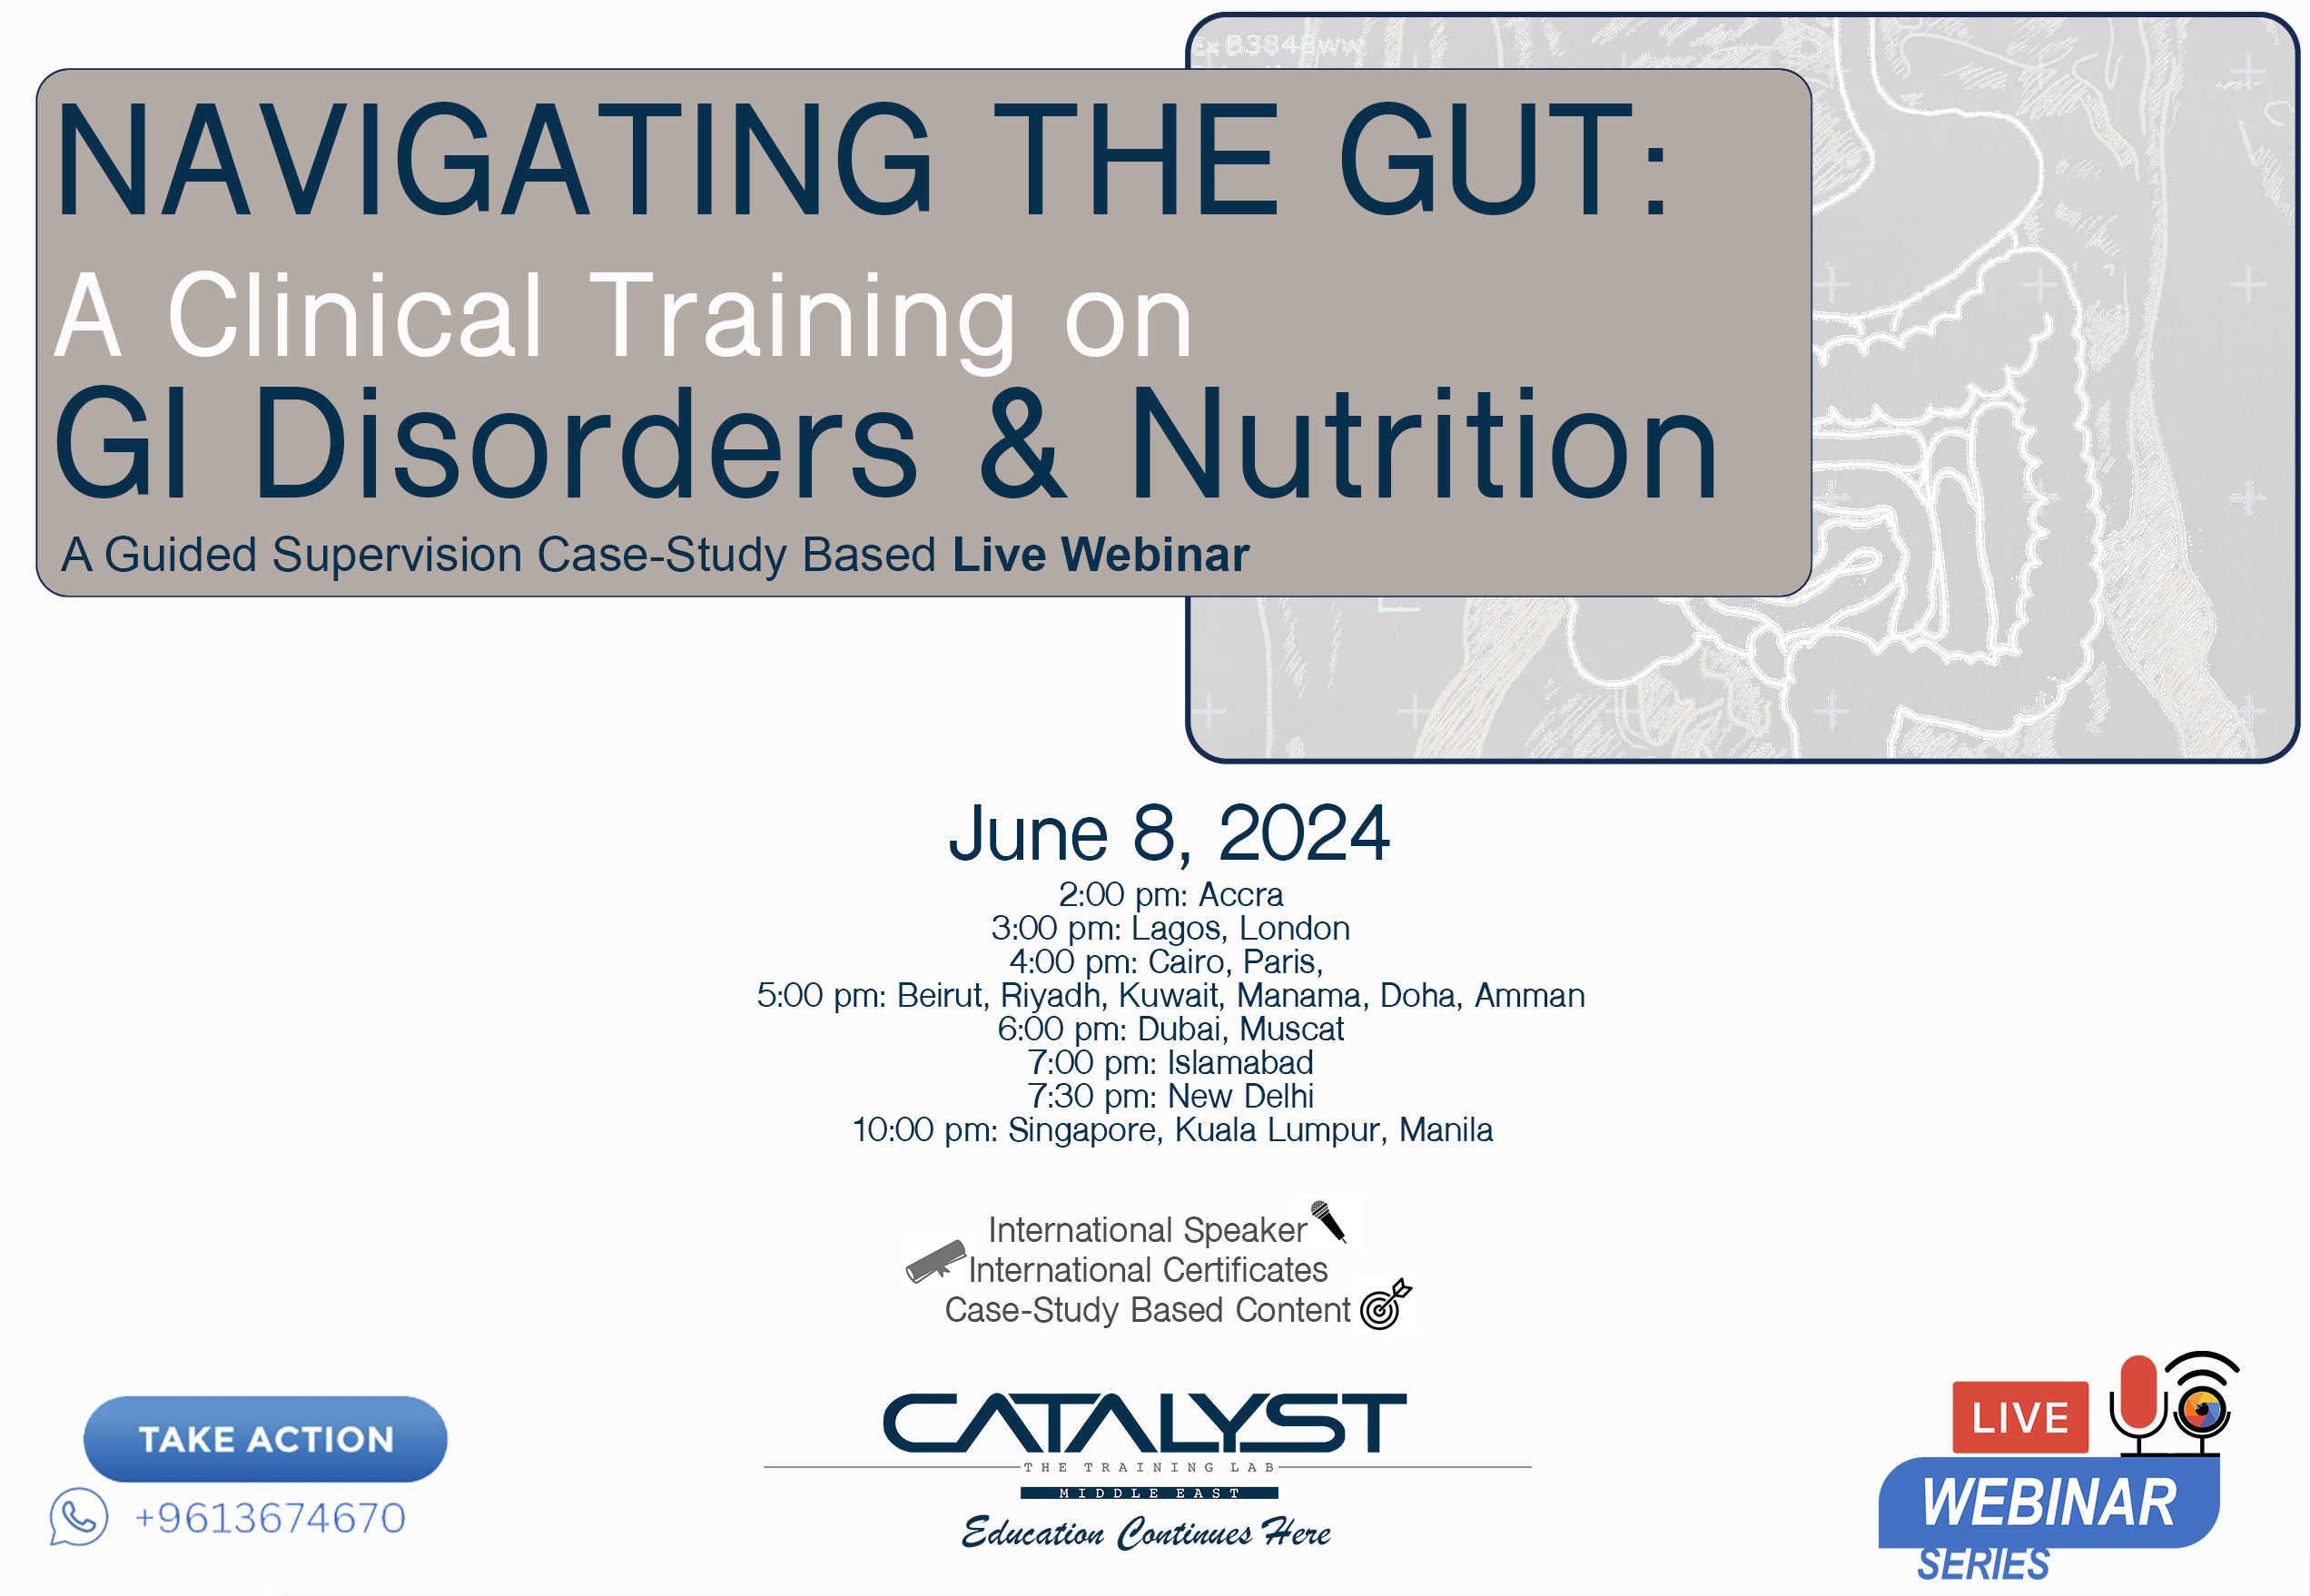 NAVIGATING THE GUT: A Clinical Training on GI Disorders & Nutrition